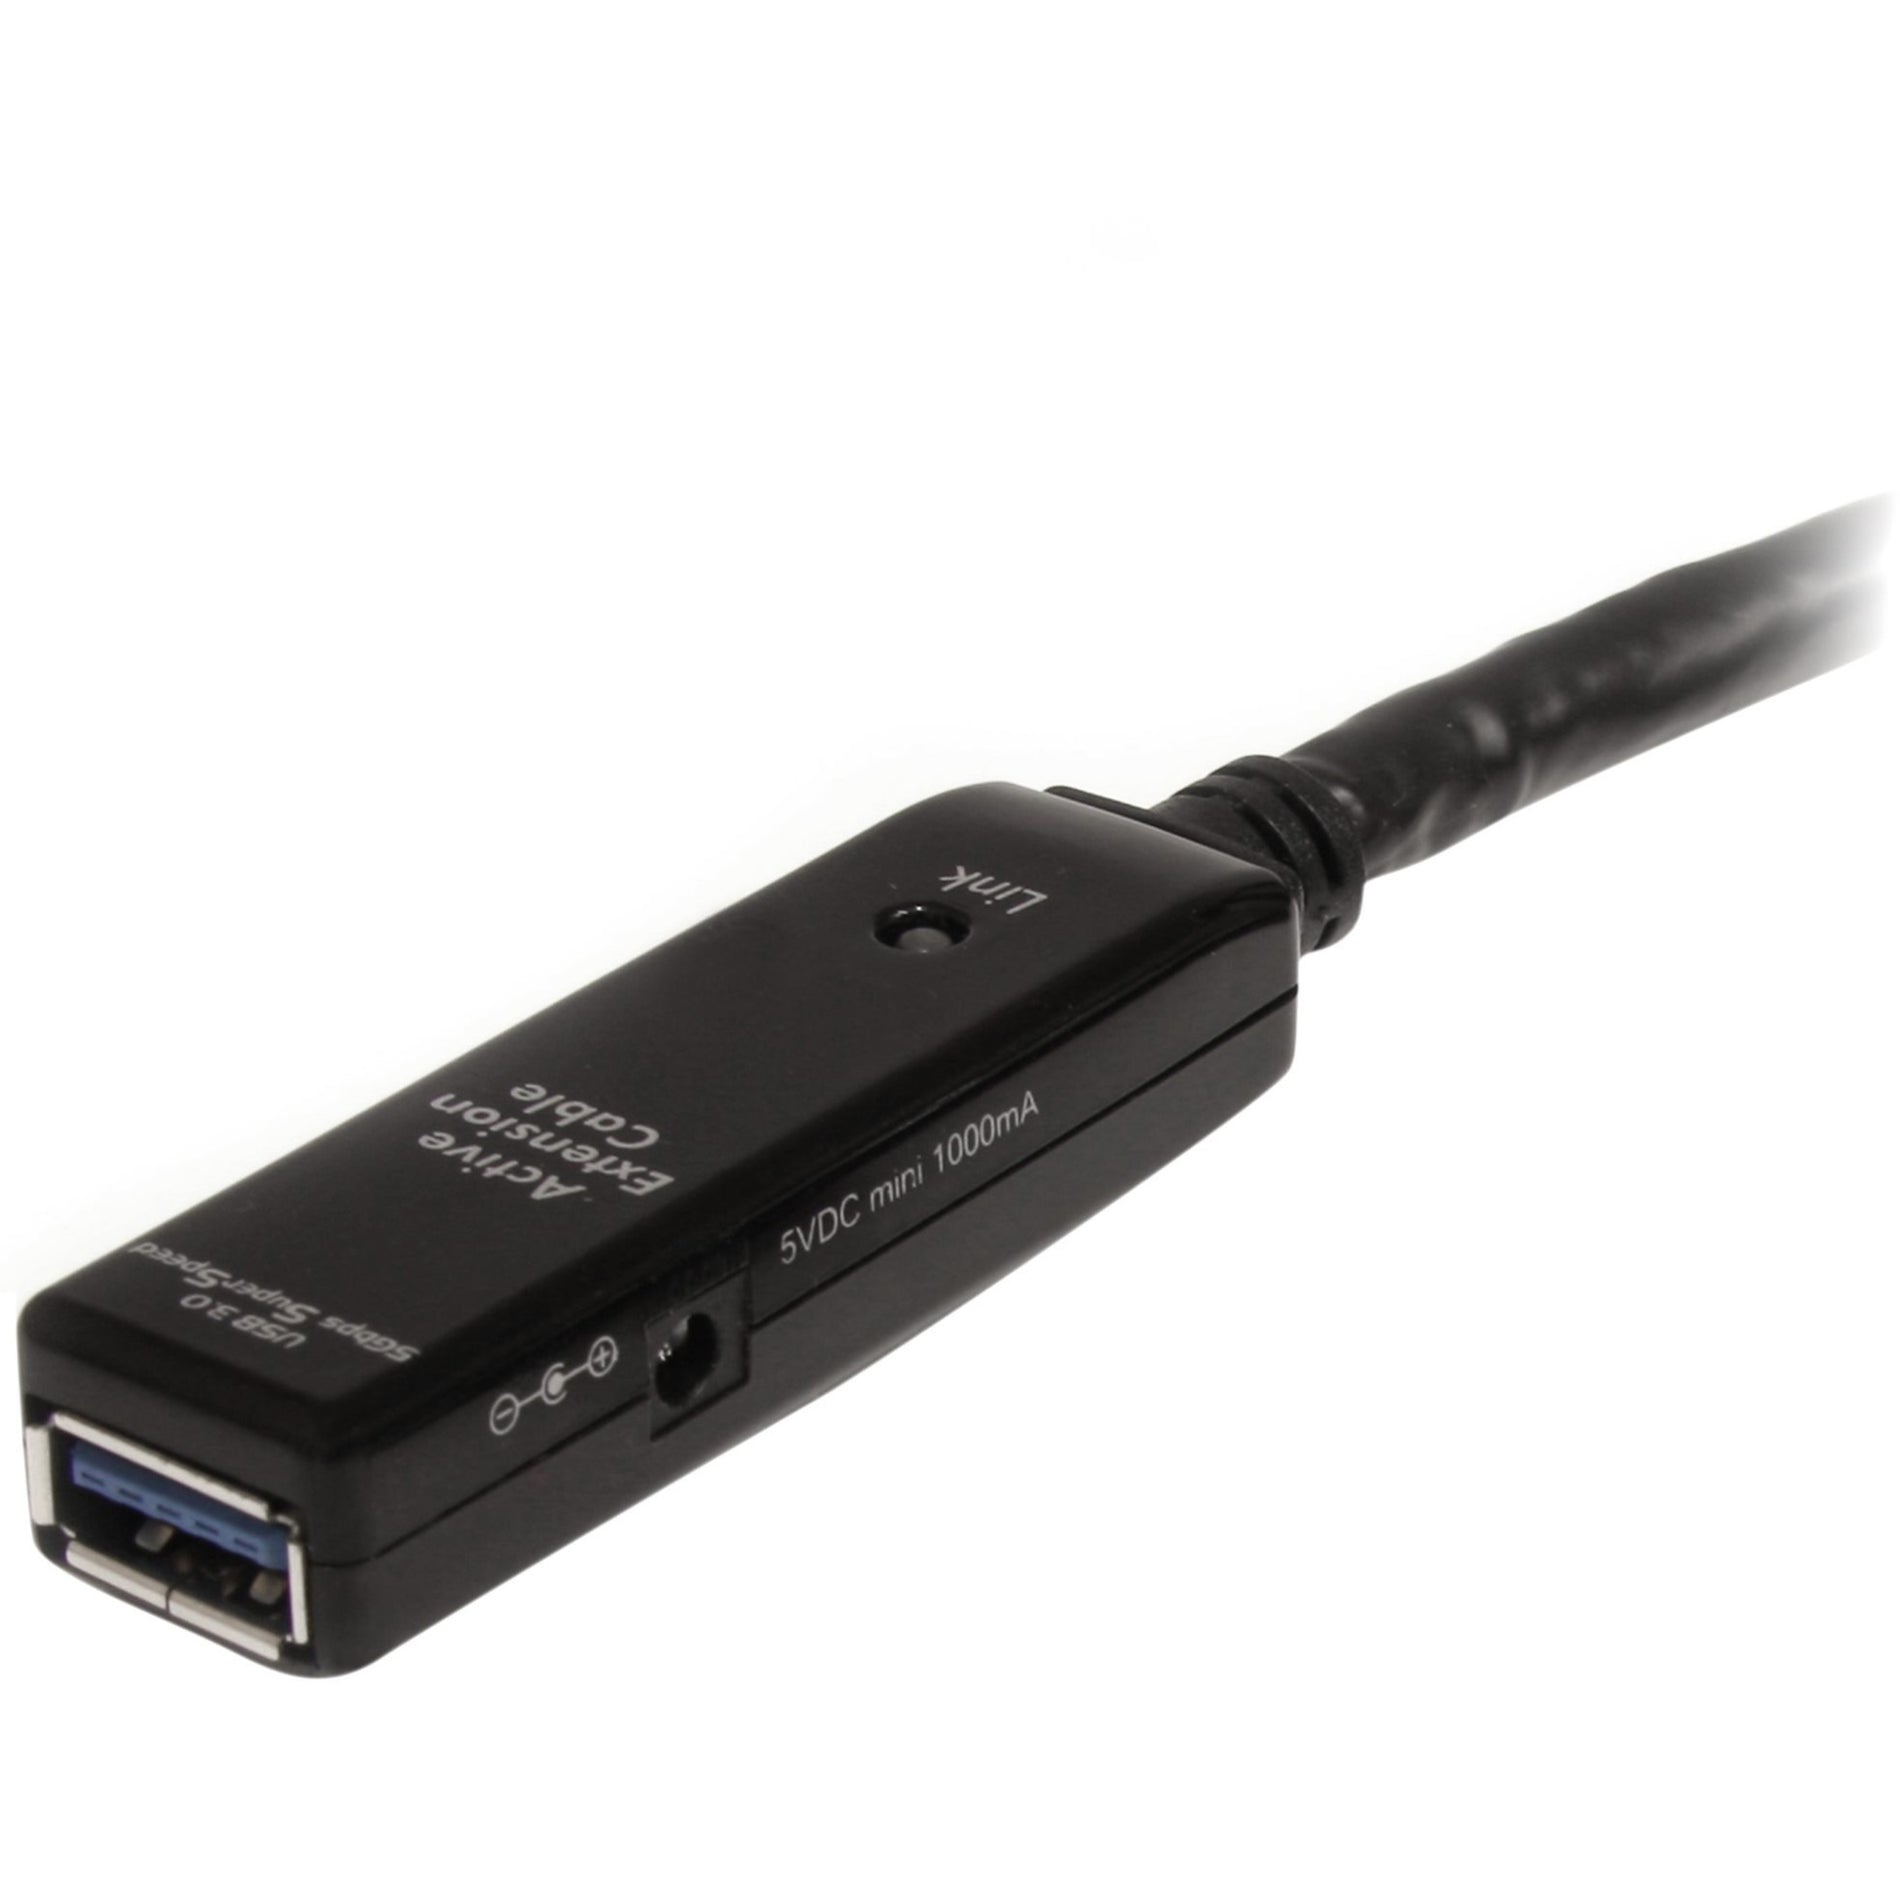 StarTech.com USB3AAEXT5M 5m USB 3.0 Active Extension Cable - M/F, Plug & Play, 16.40 ft Data Transfer Cable